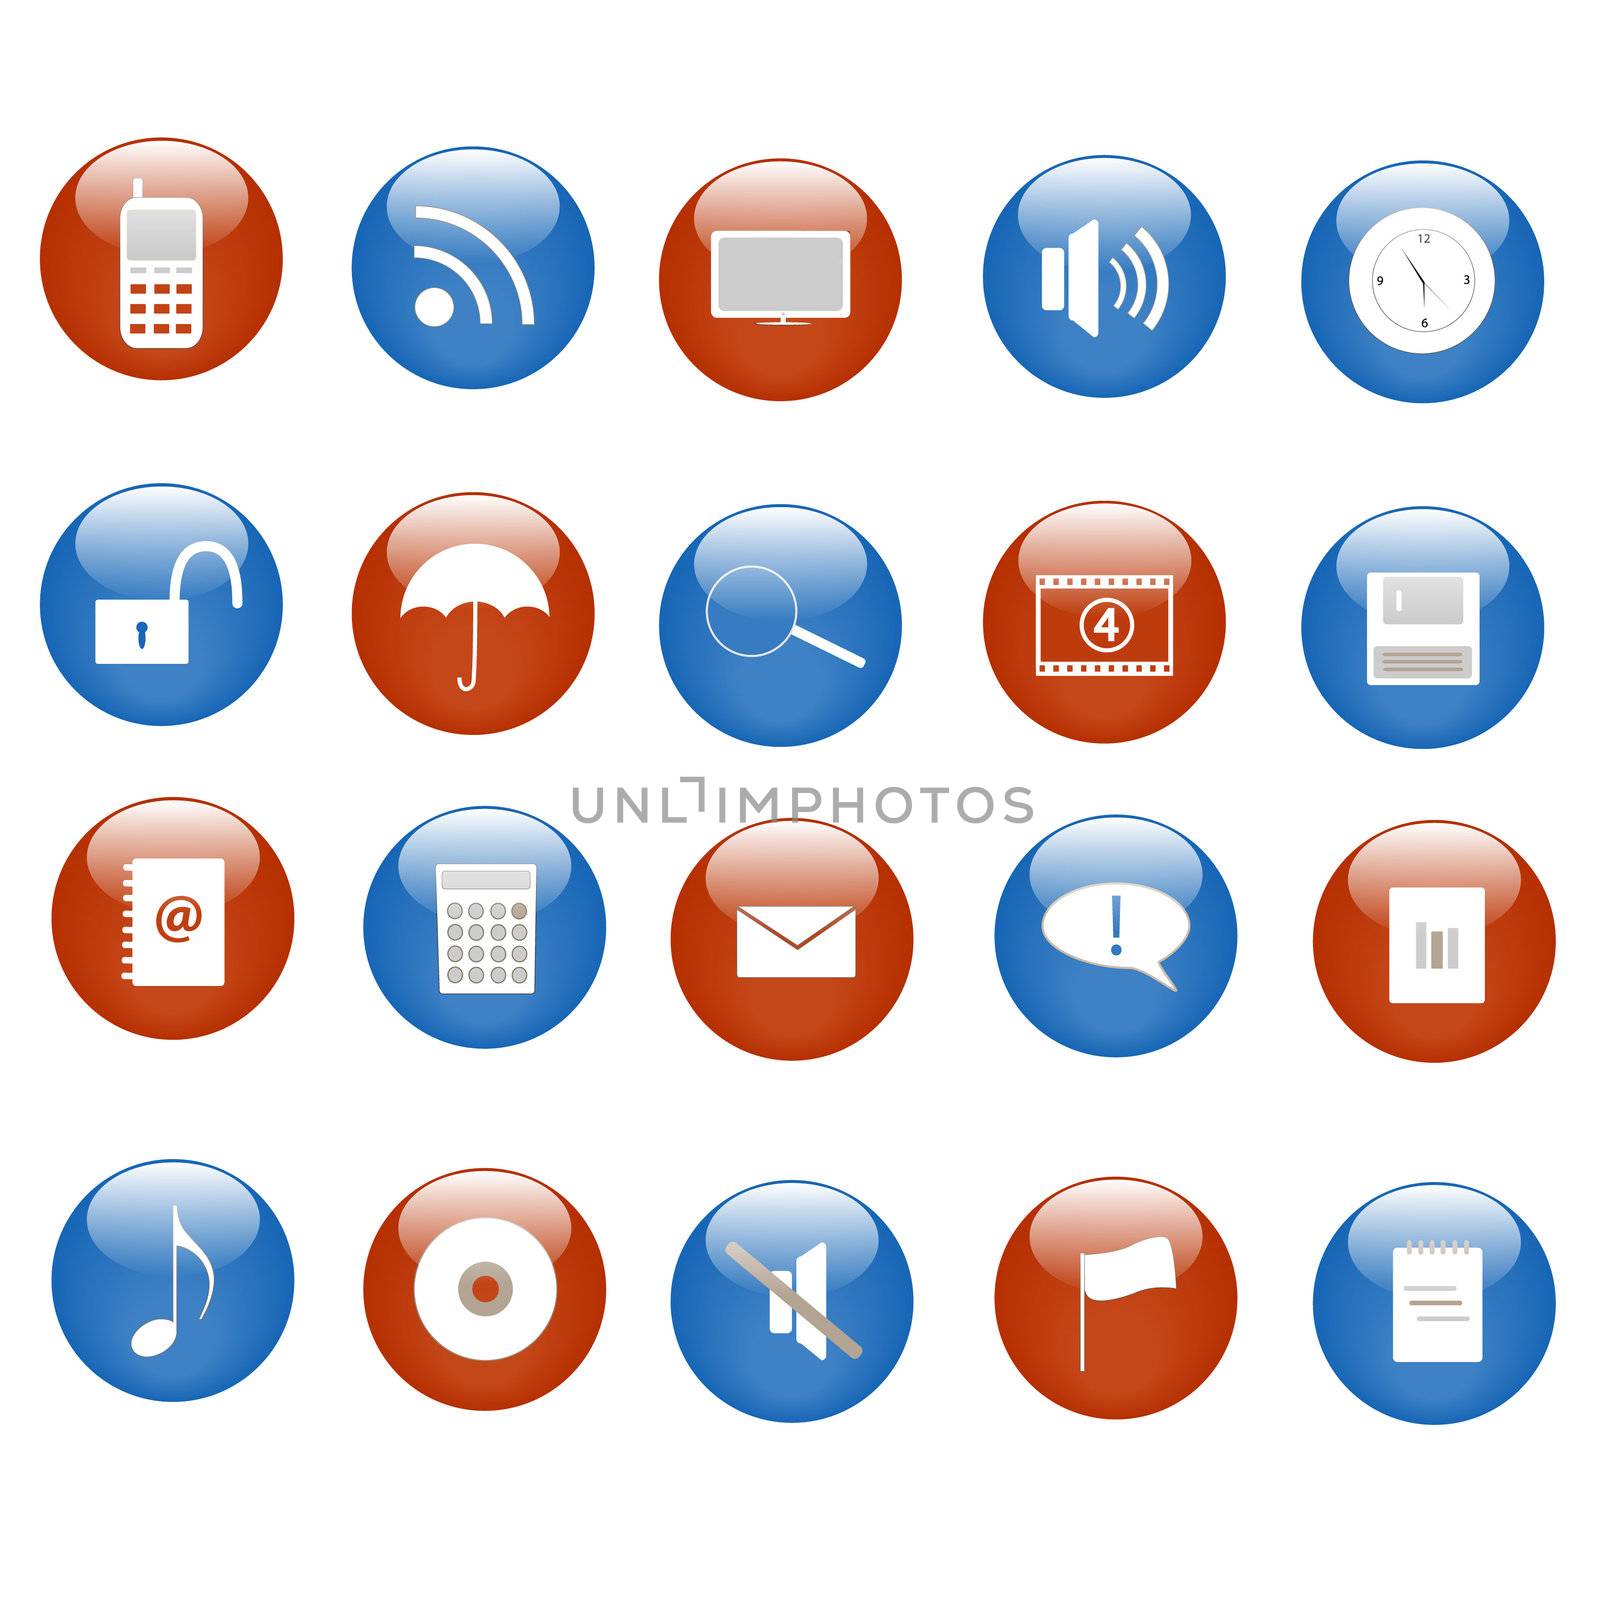 Various blue and red web icons on buttons.